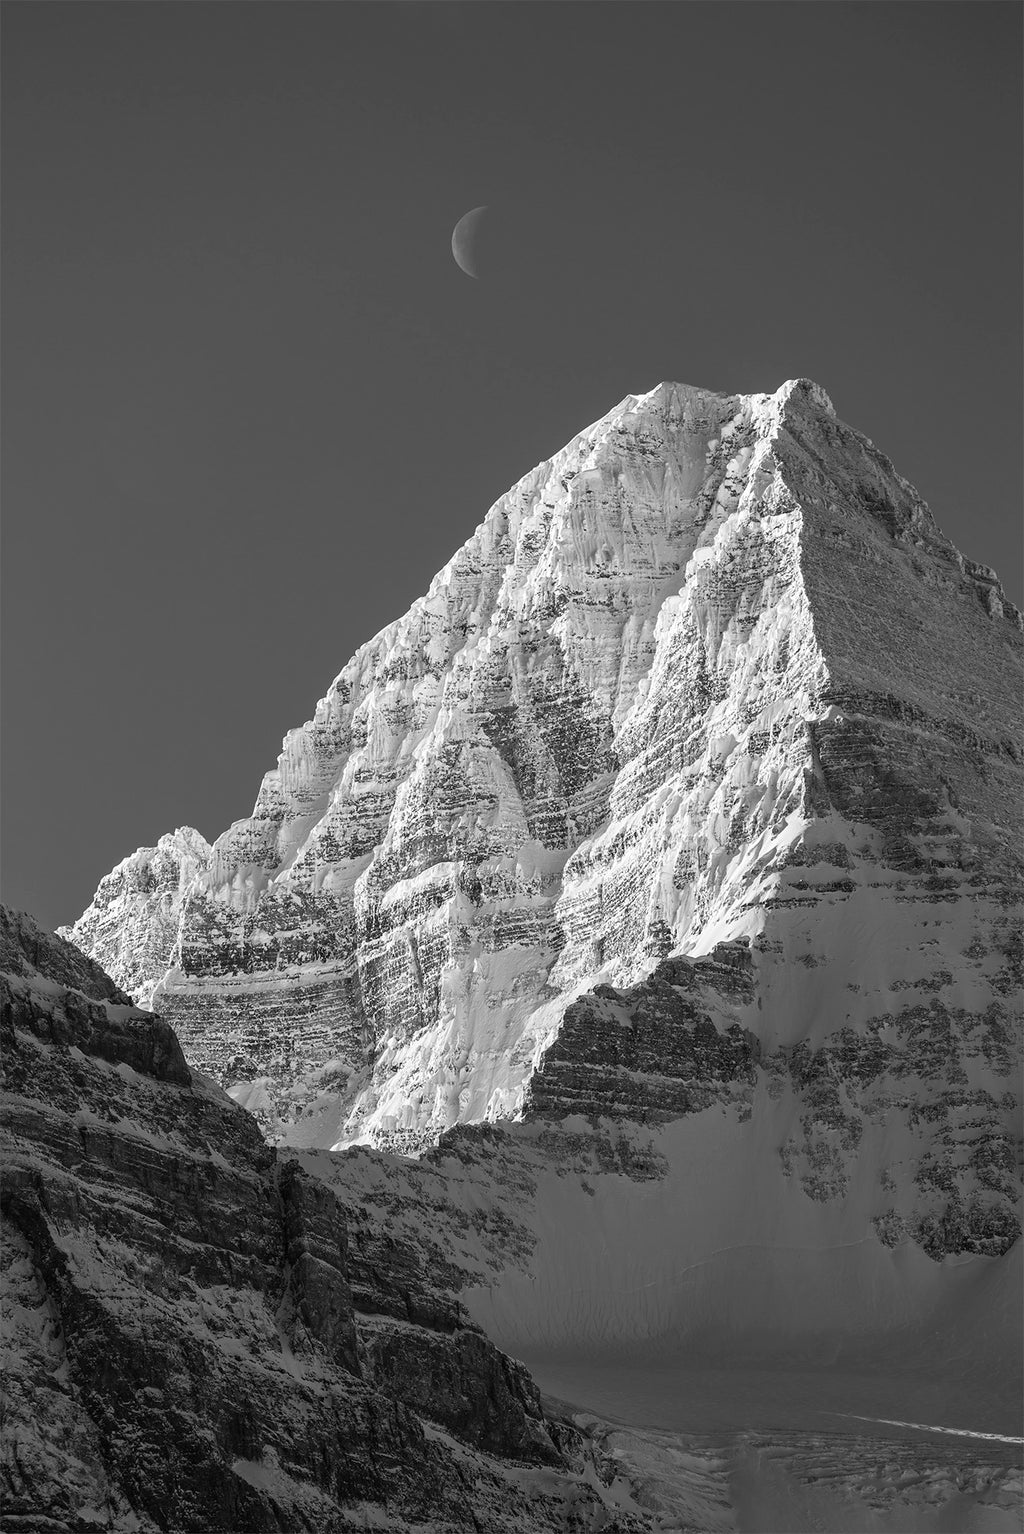 Assiniboine and Waning Moon 24x36 inch Canvas Print